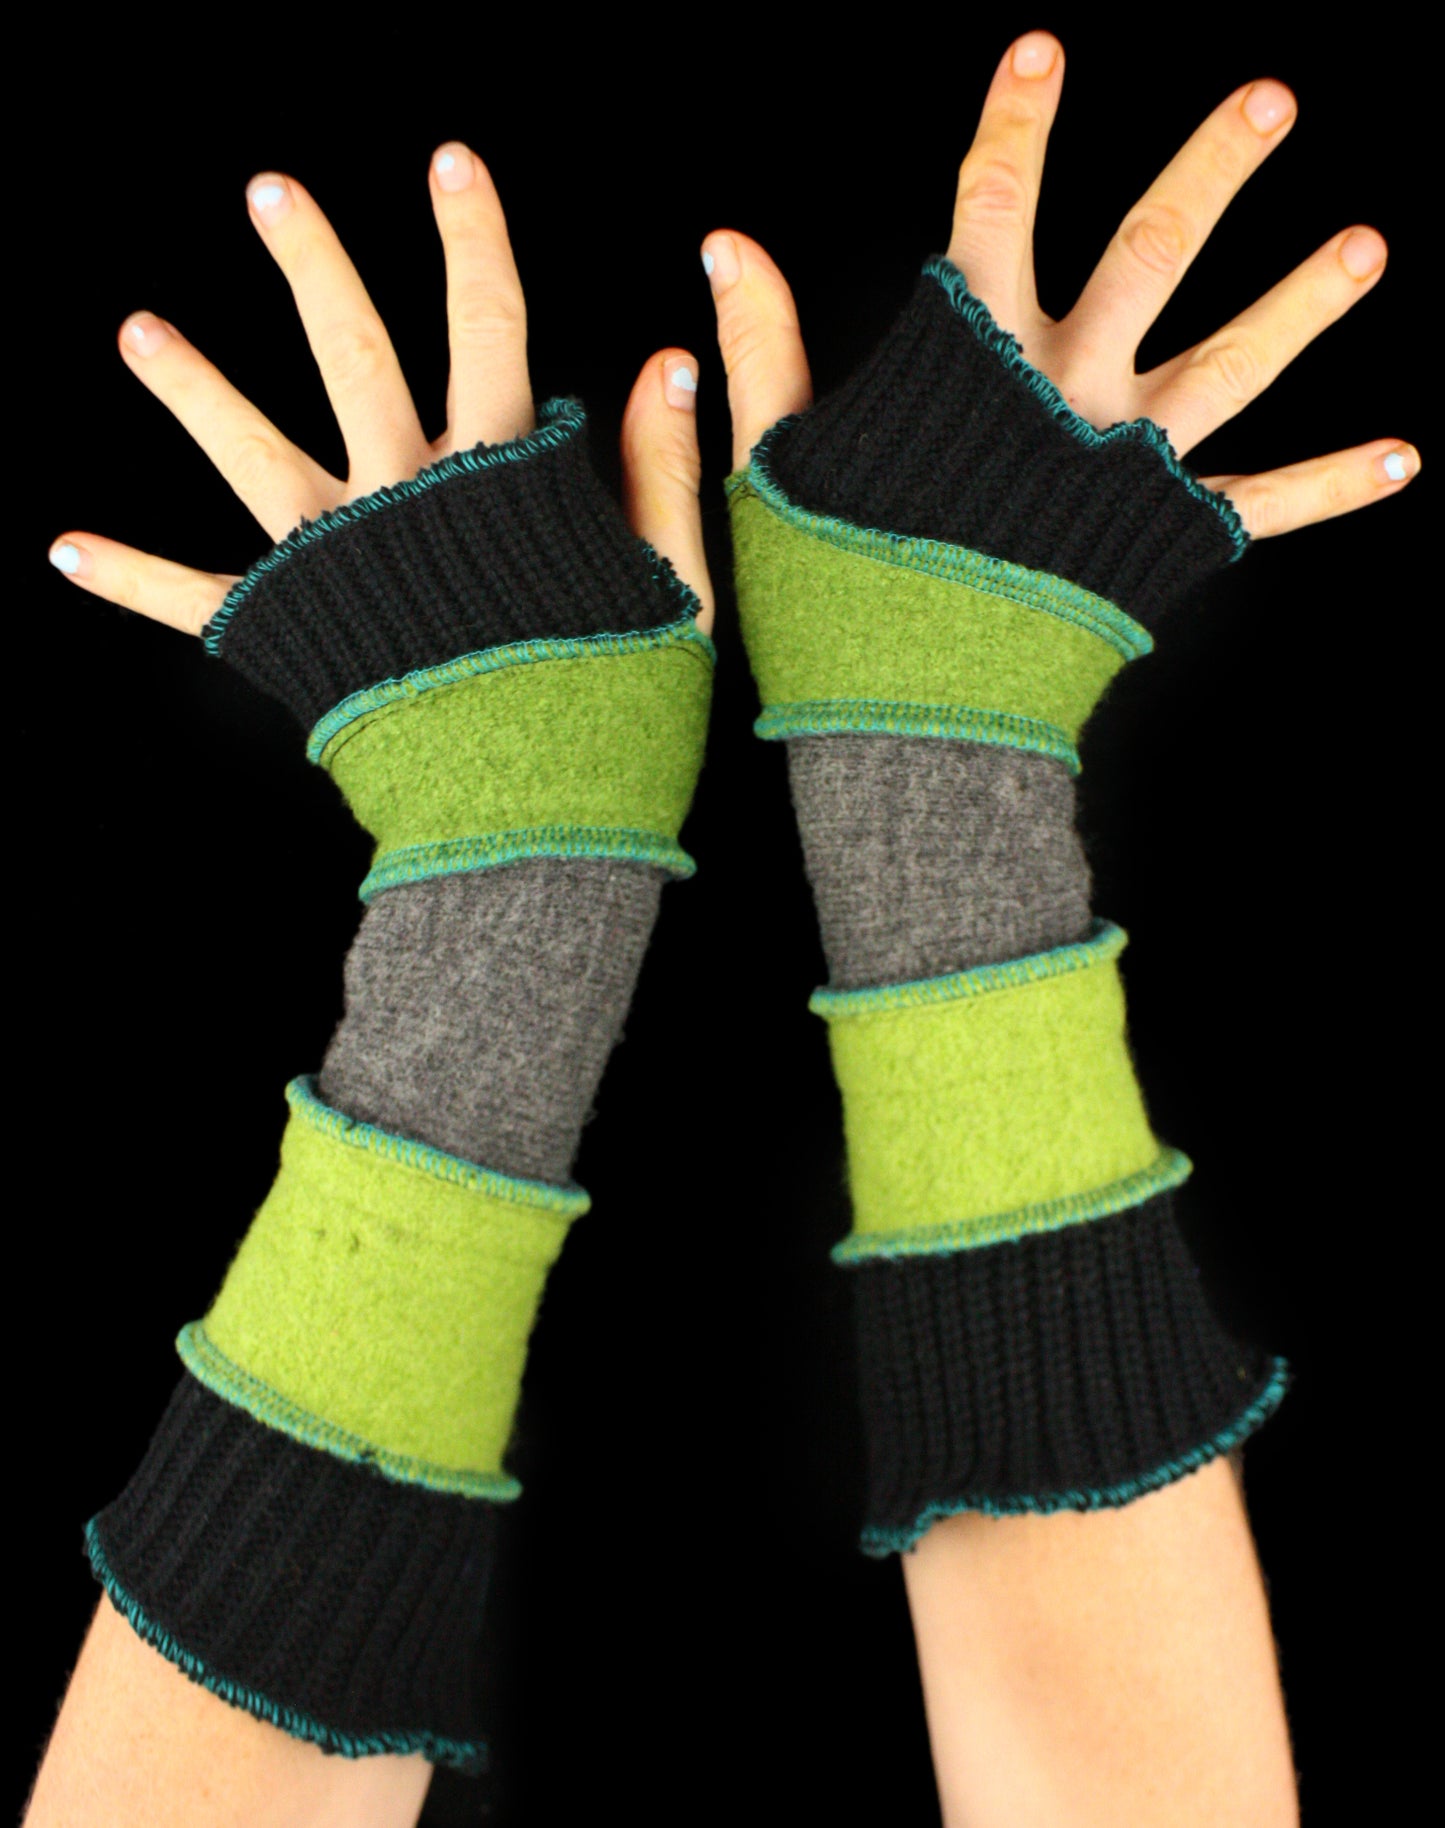 Arm Warmers - made from upcycled sweaters